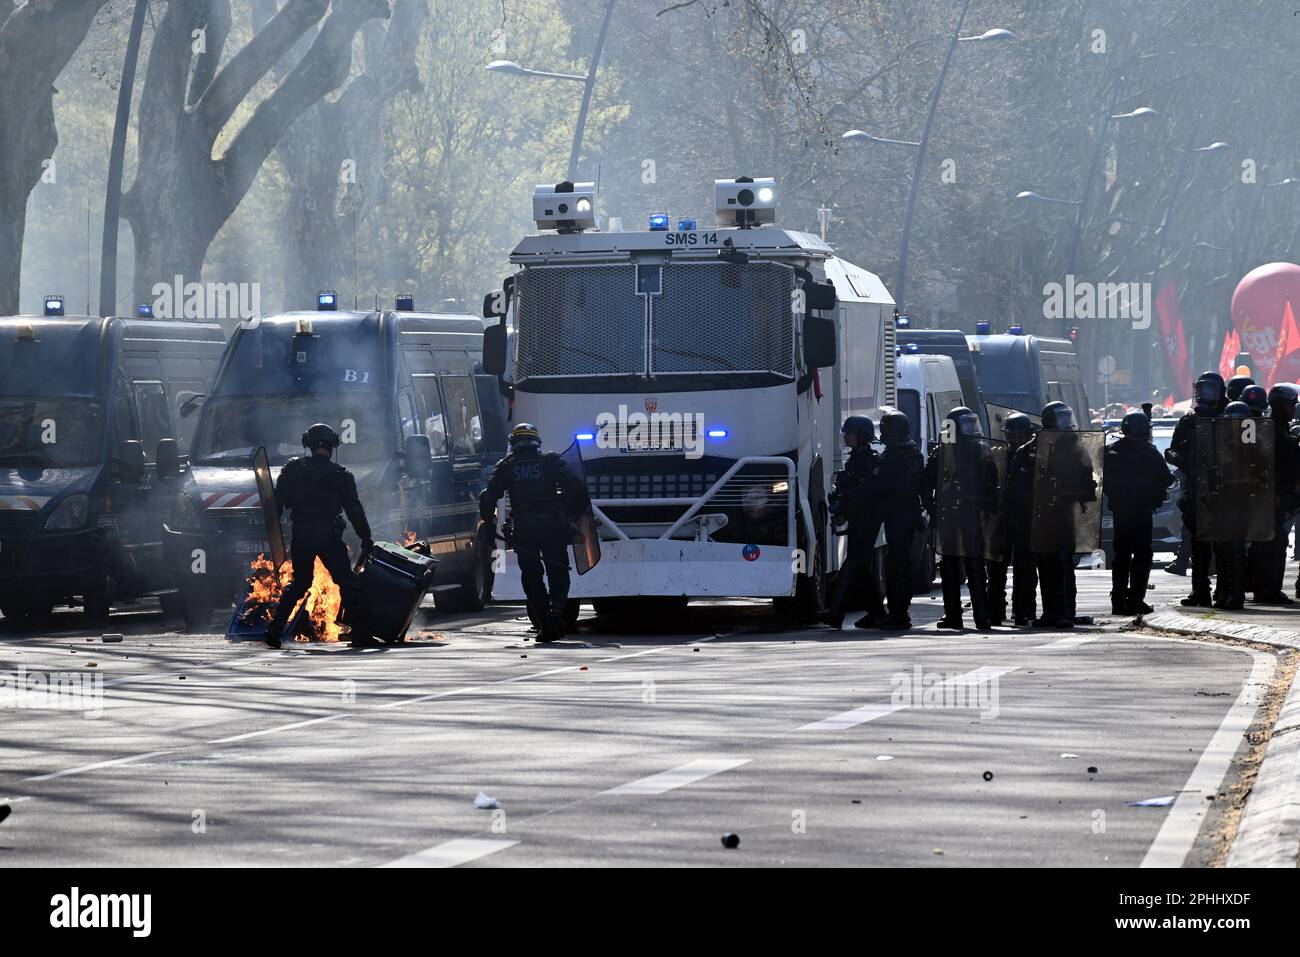 2023 03 28: demonstrations against retirement new law in France by president Macron turned into violent clashes with anti riot police units all over France. Stock Photo